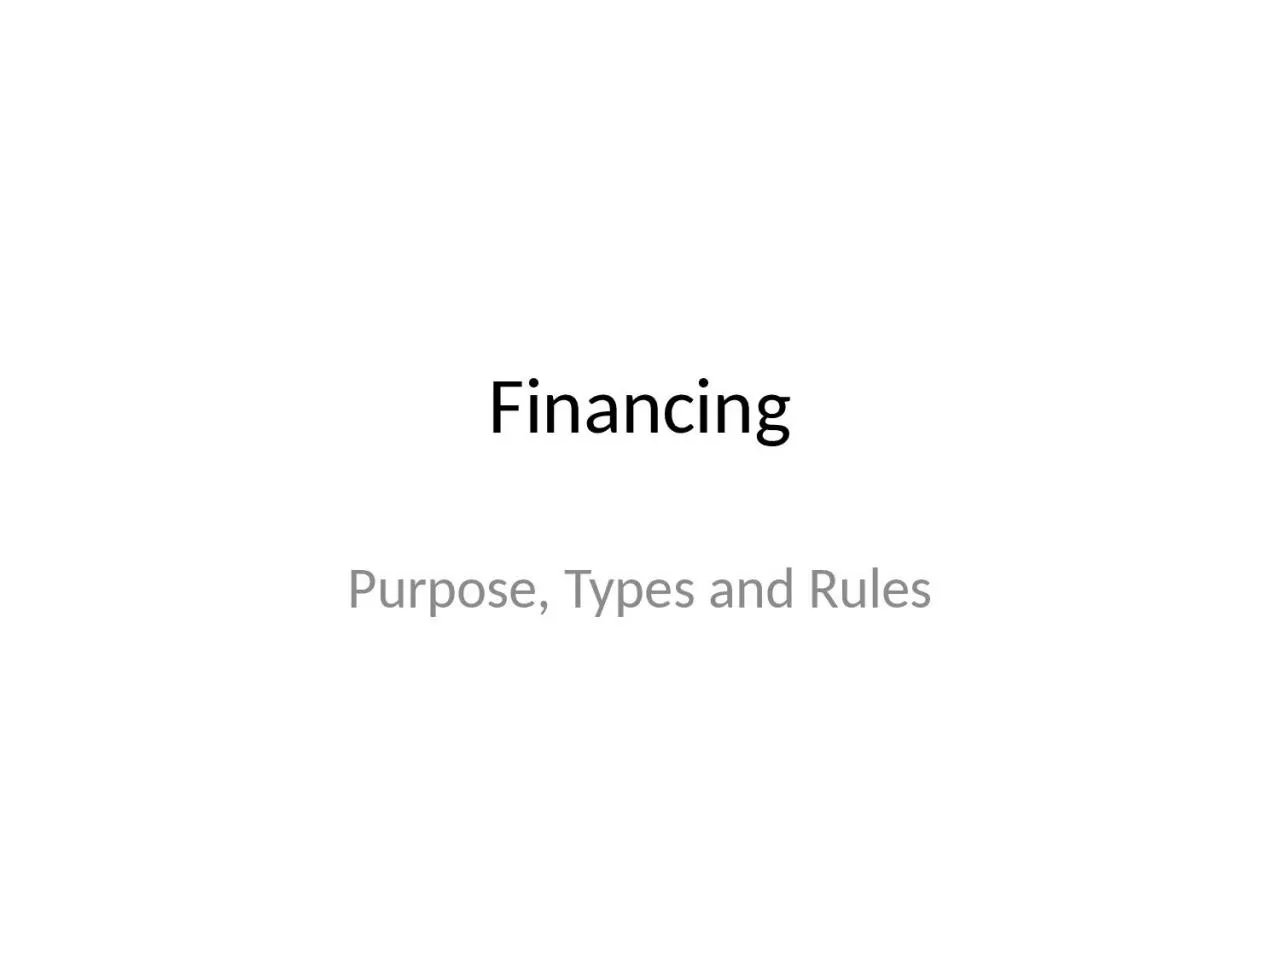 Financing Purpose, Types and Rules